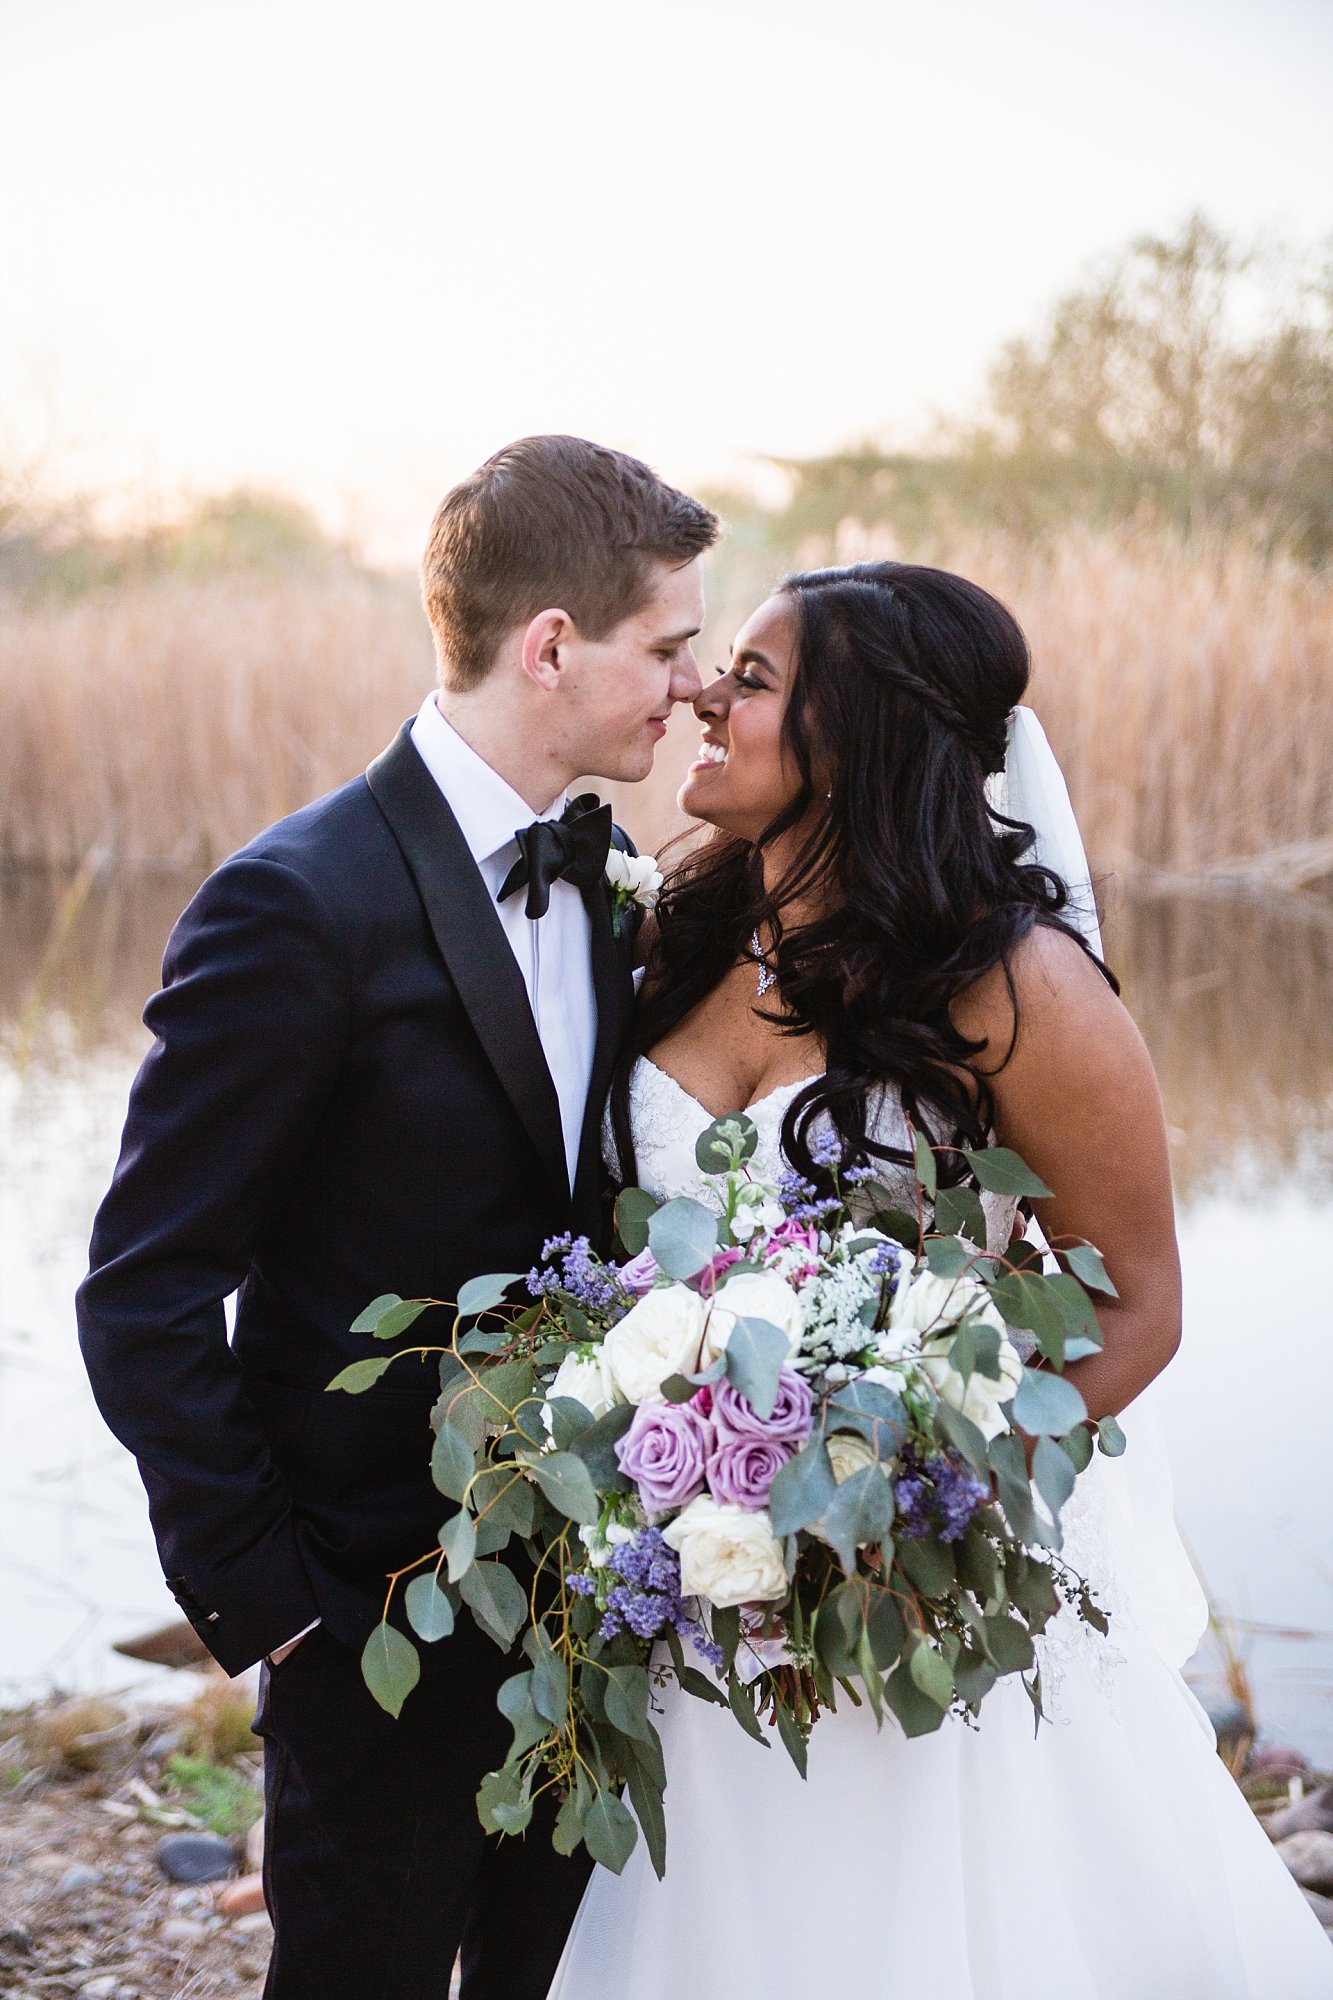 Bride and groom sharing an intimate moment on their wedding day at the Rio Salado Audubon in Phoenix by wedding photographers PMA Photography.